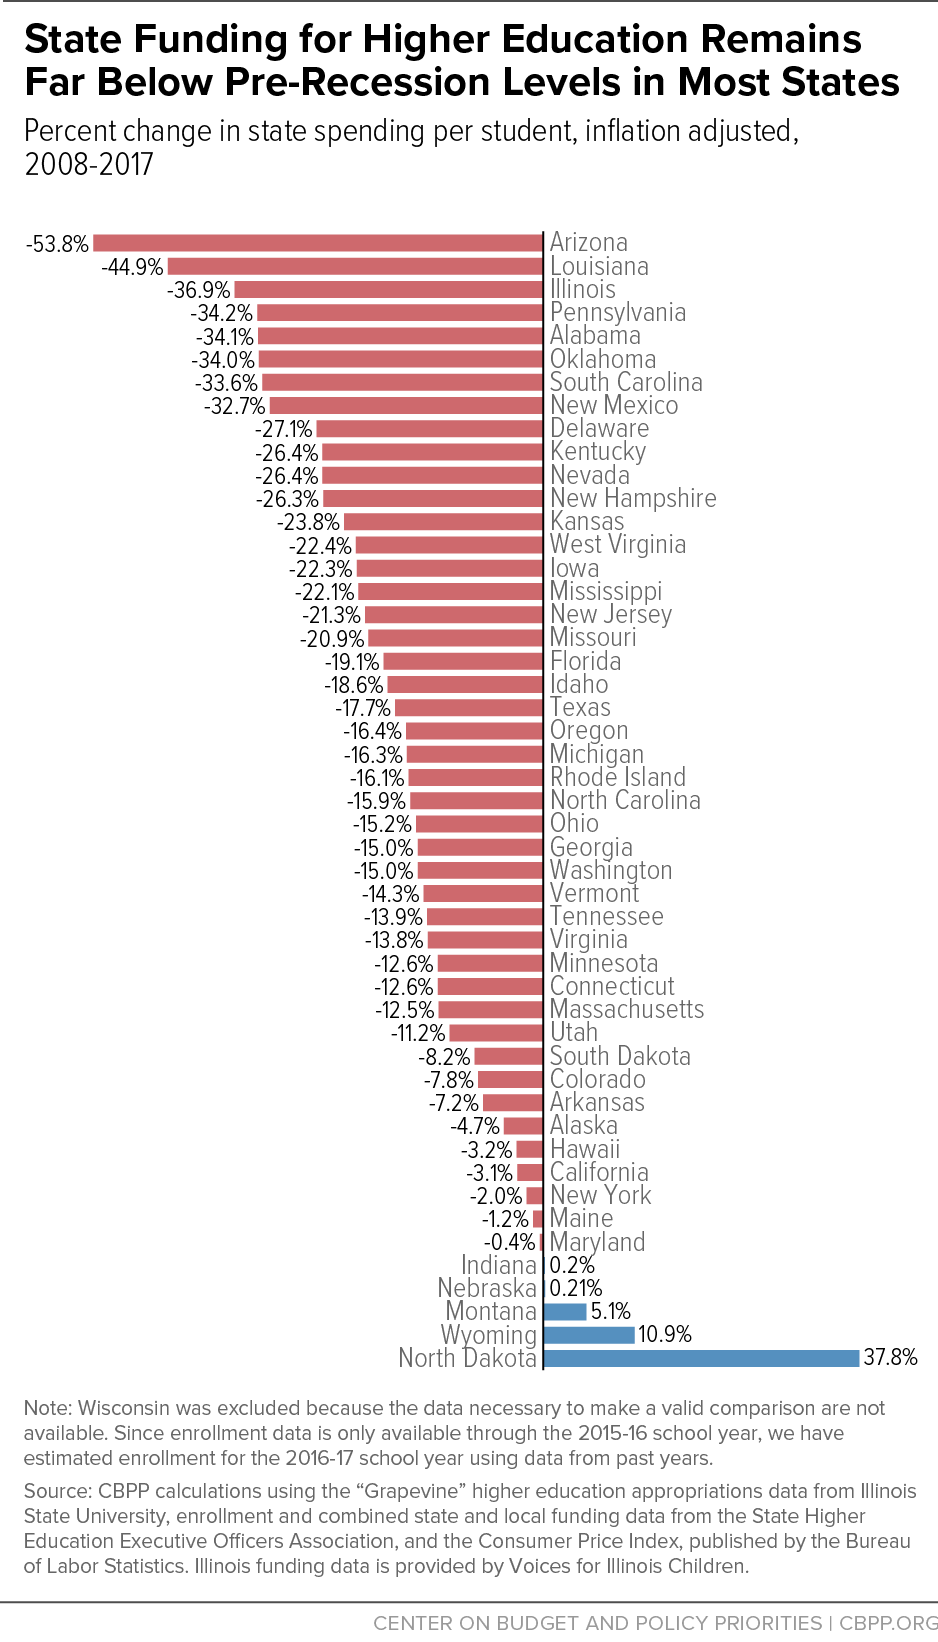 State Funding for Higher Education Remains Far Below Pre-Recession Levels in Most States